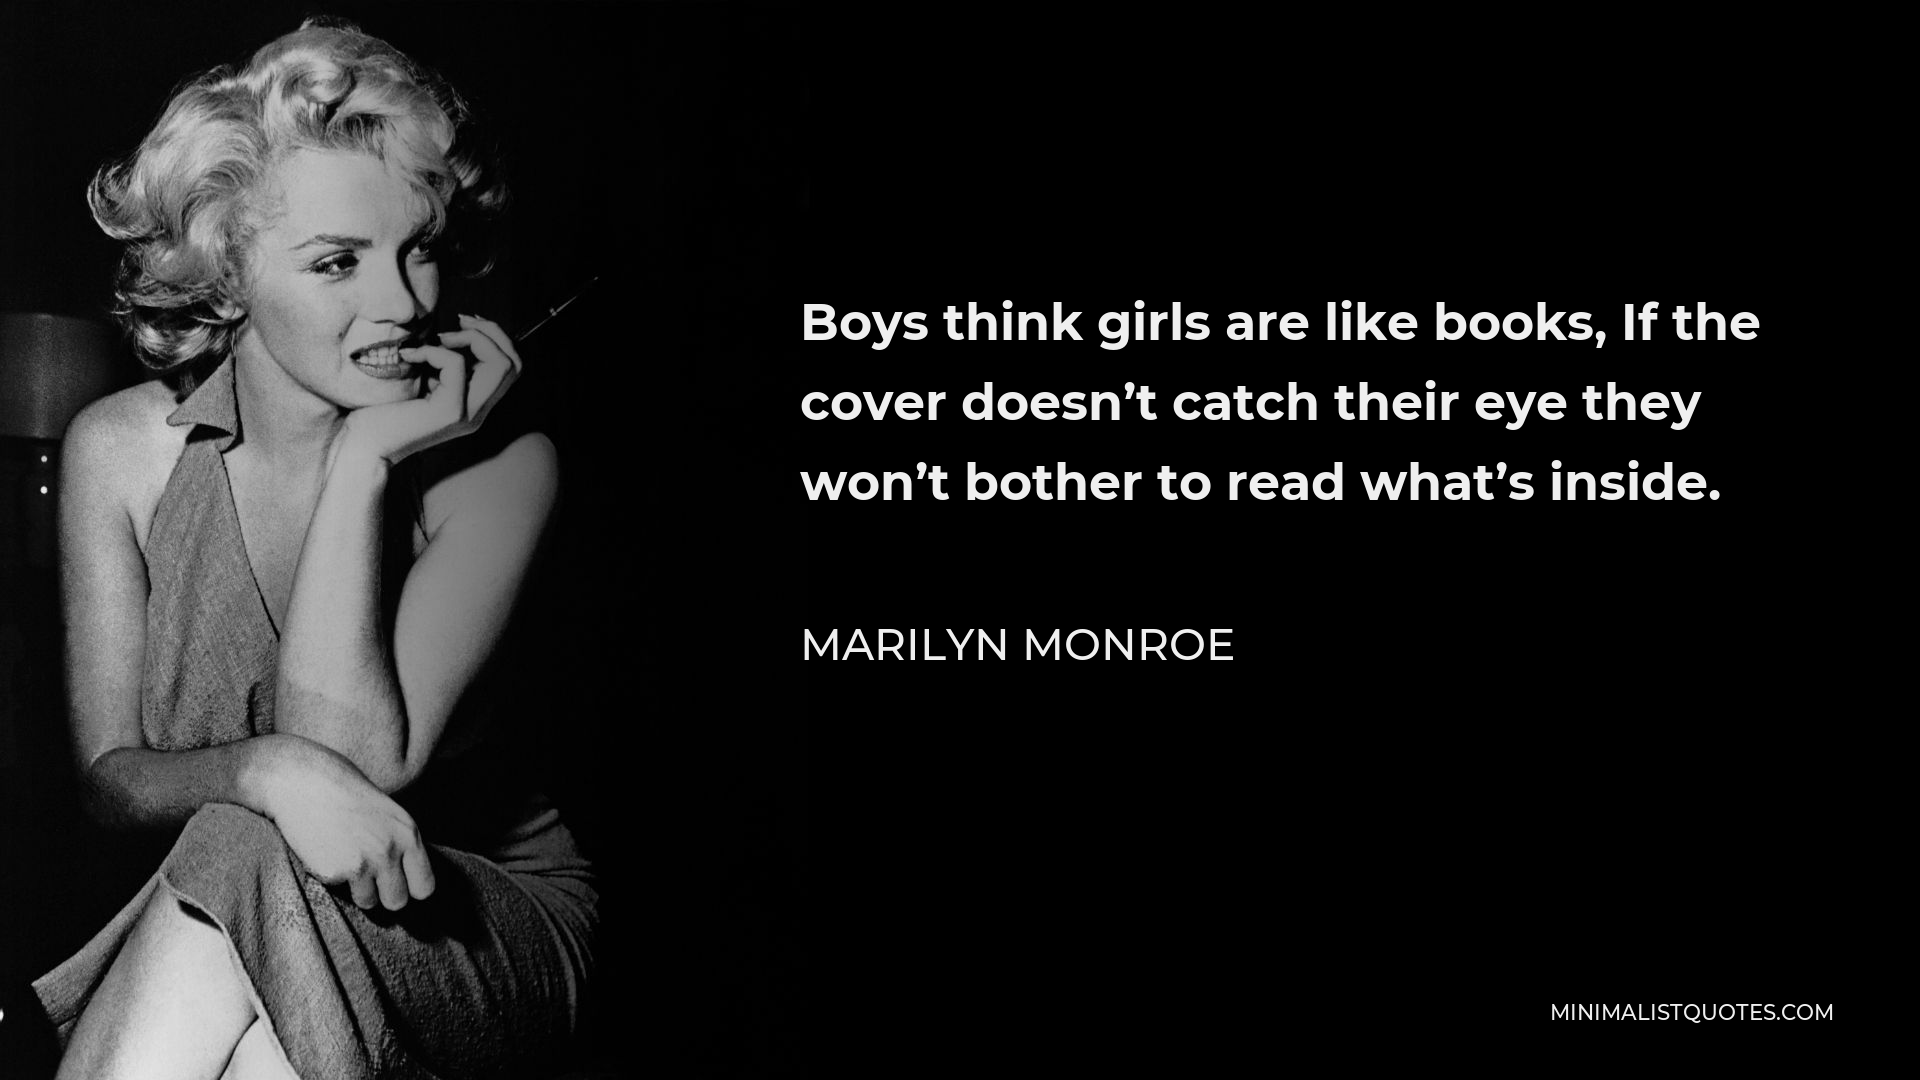 Marilyn Monroe Quote - Boys think girls are like books, If the cover doesn’t catch their eye they won’t bother to read what’s inside.